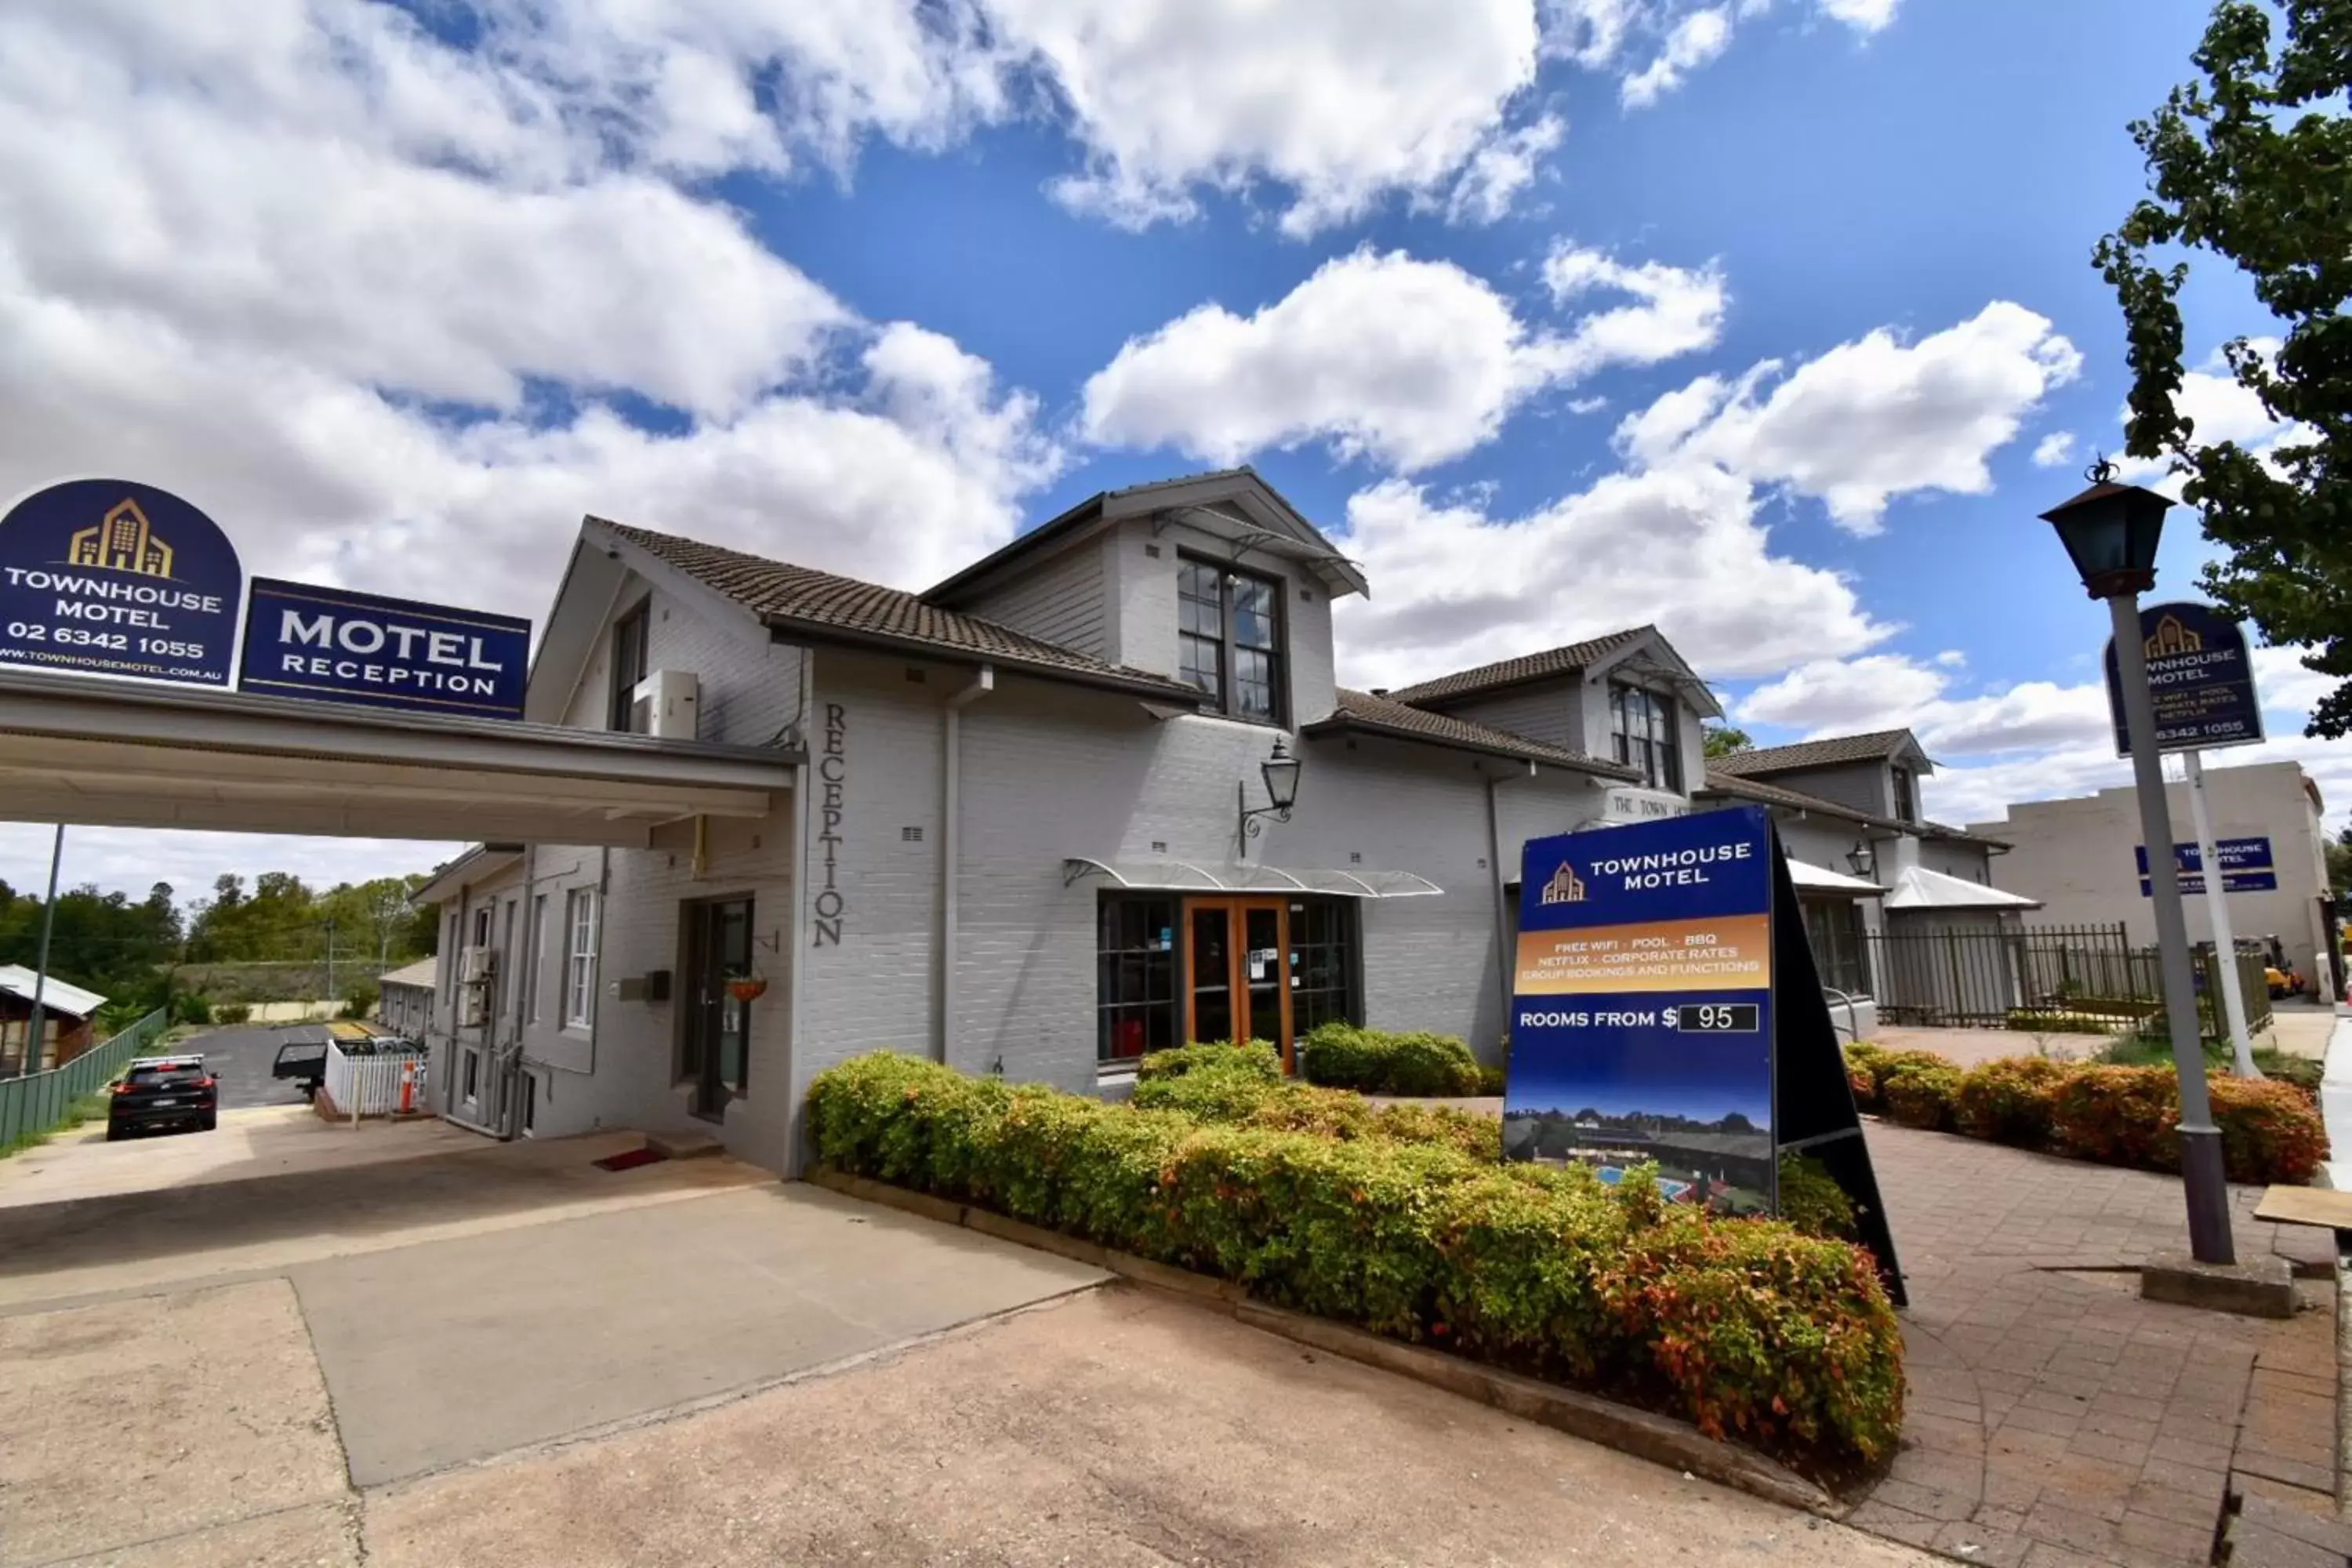 Property Building in Townhouse Motel Cowra